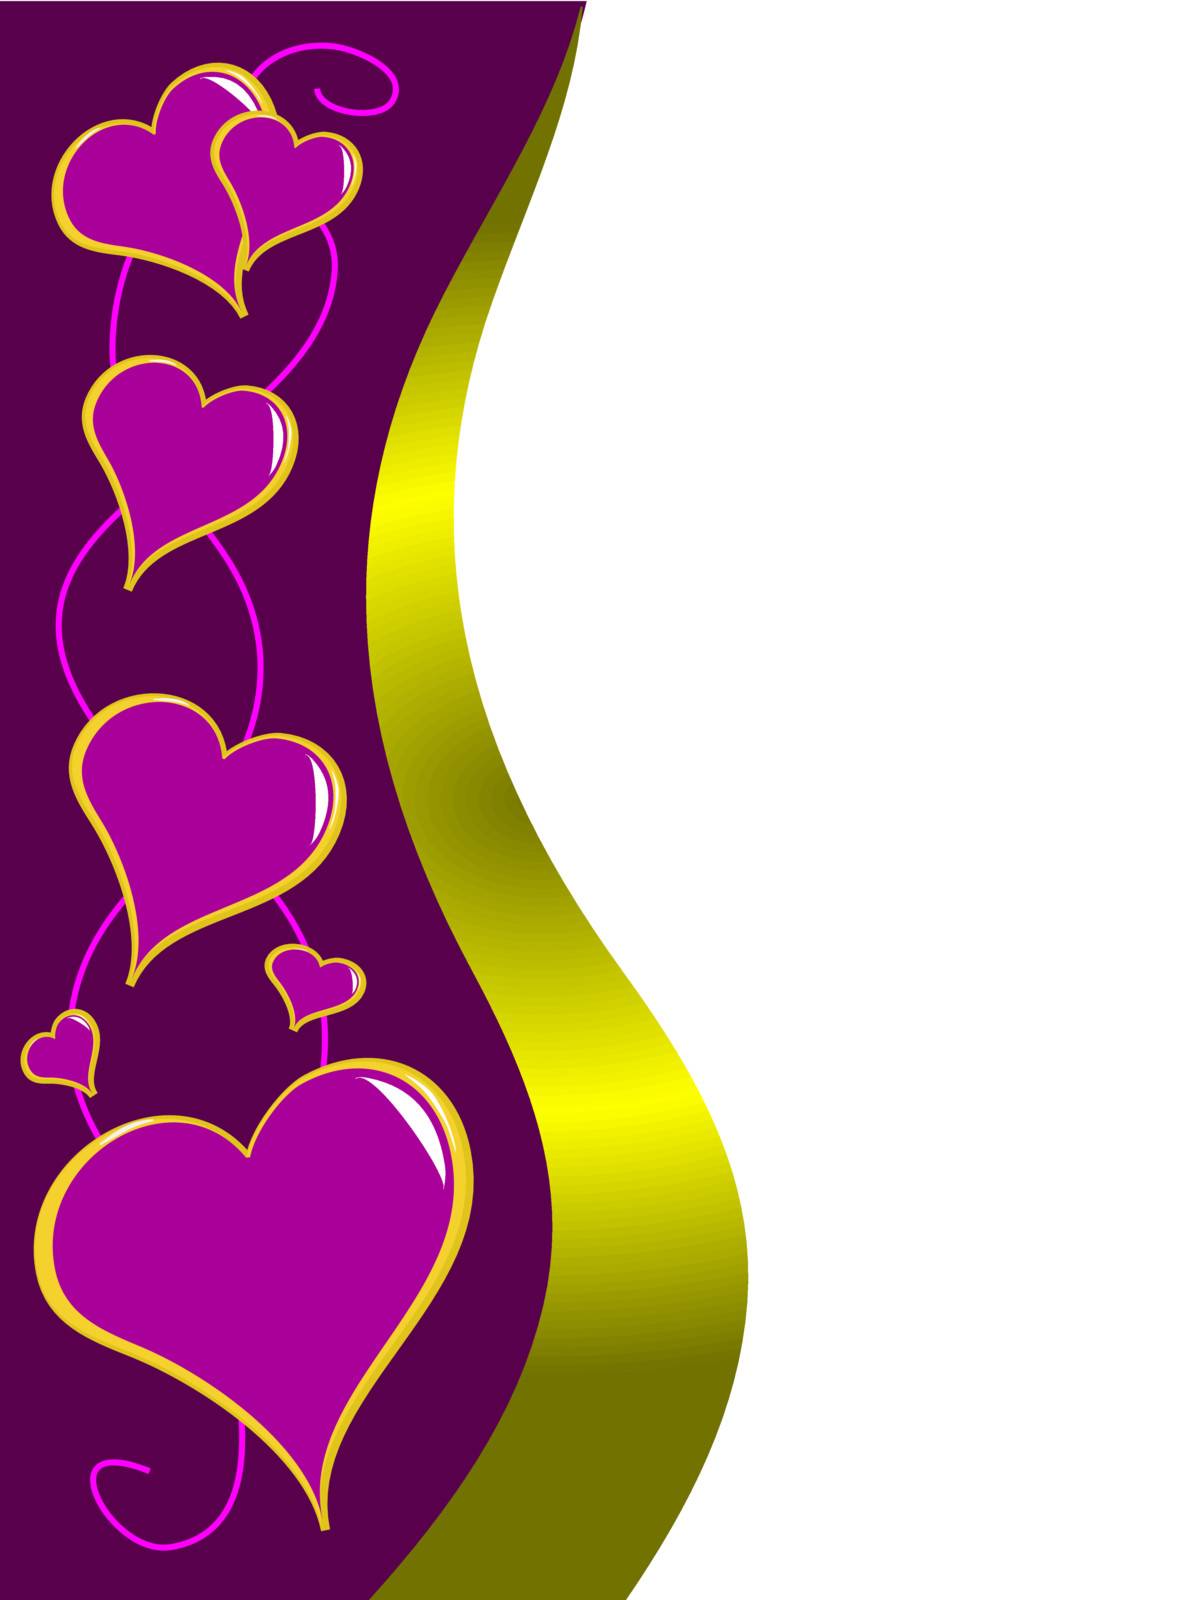 A mauve hearts vector illustration which can be used for valentines day ,love,romance or weddings